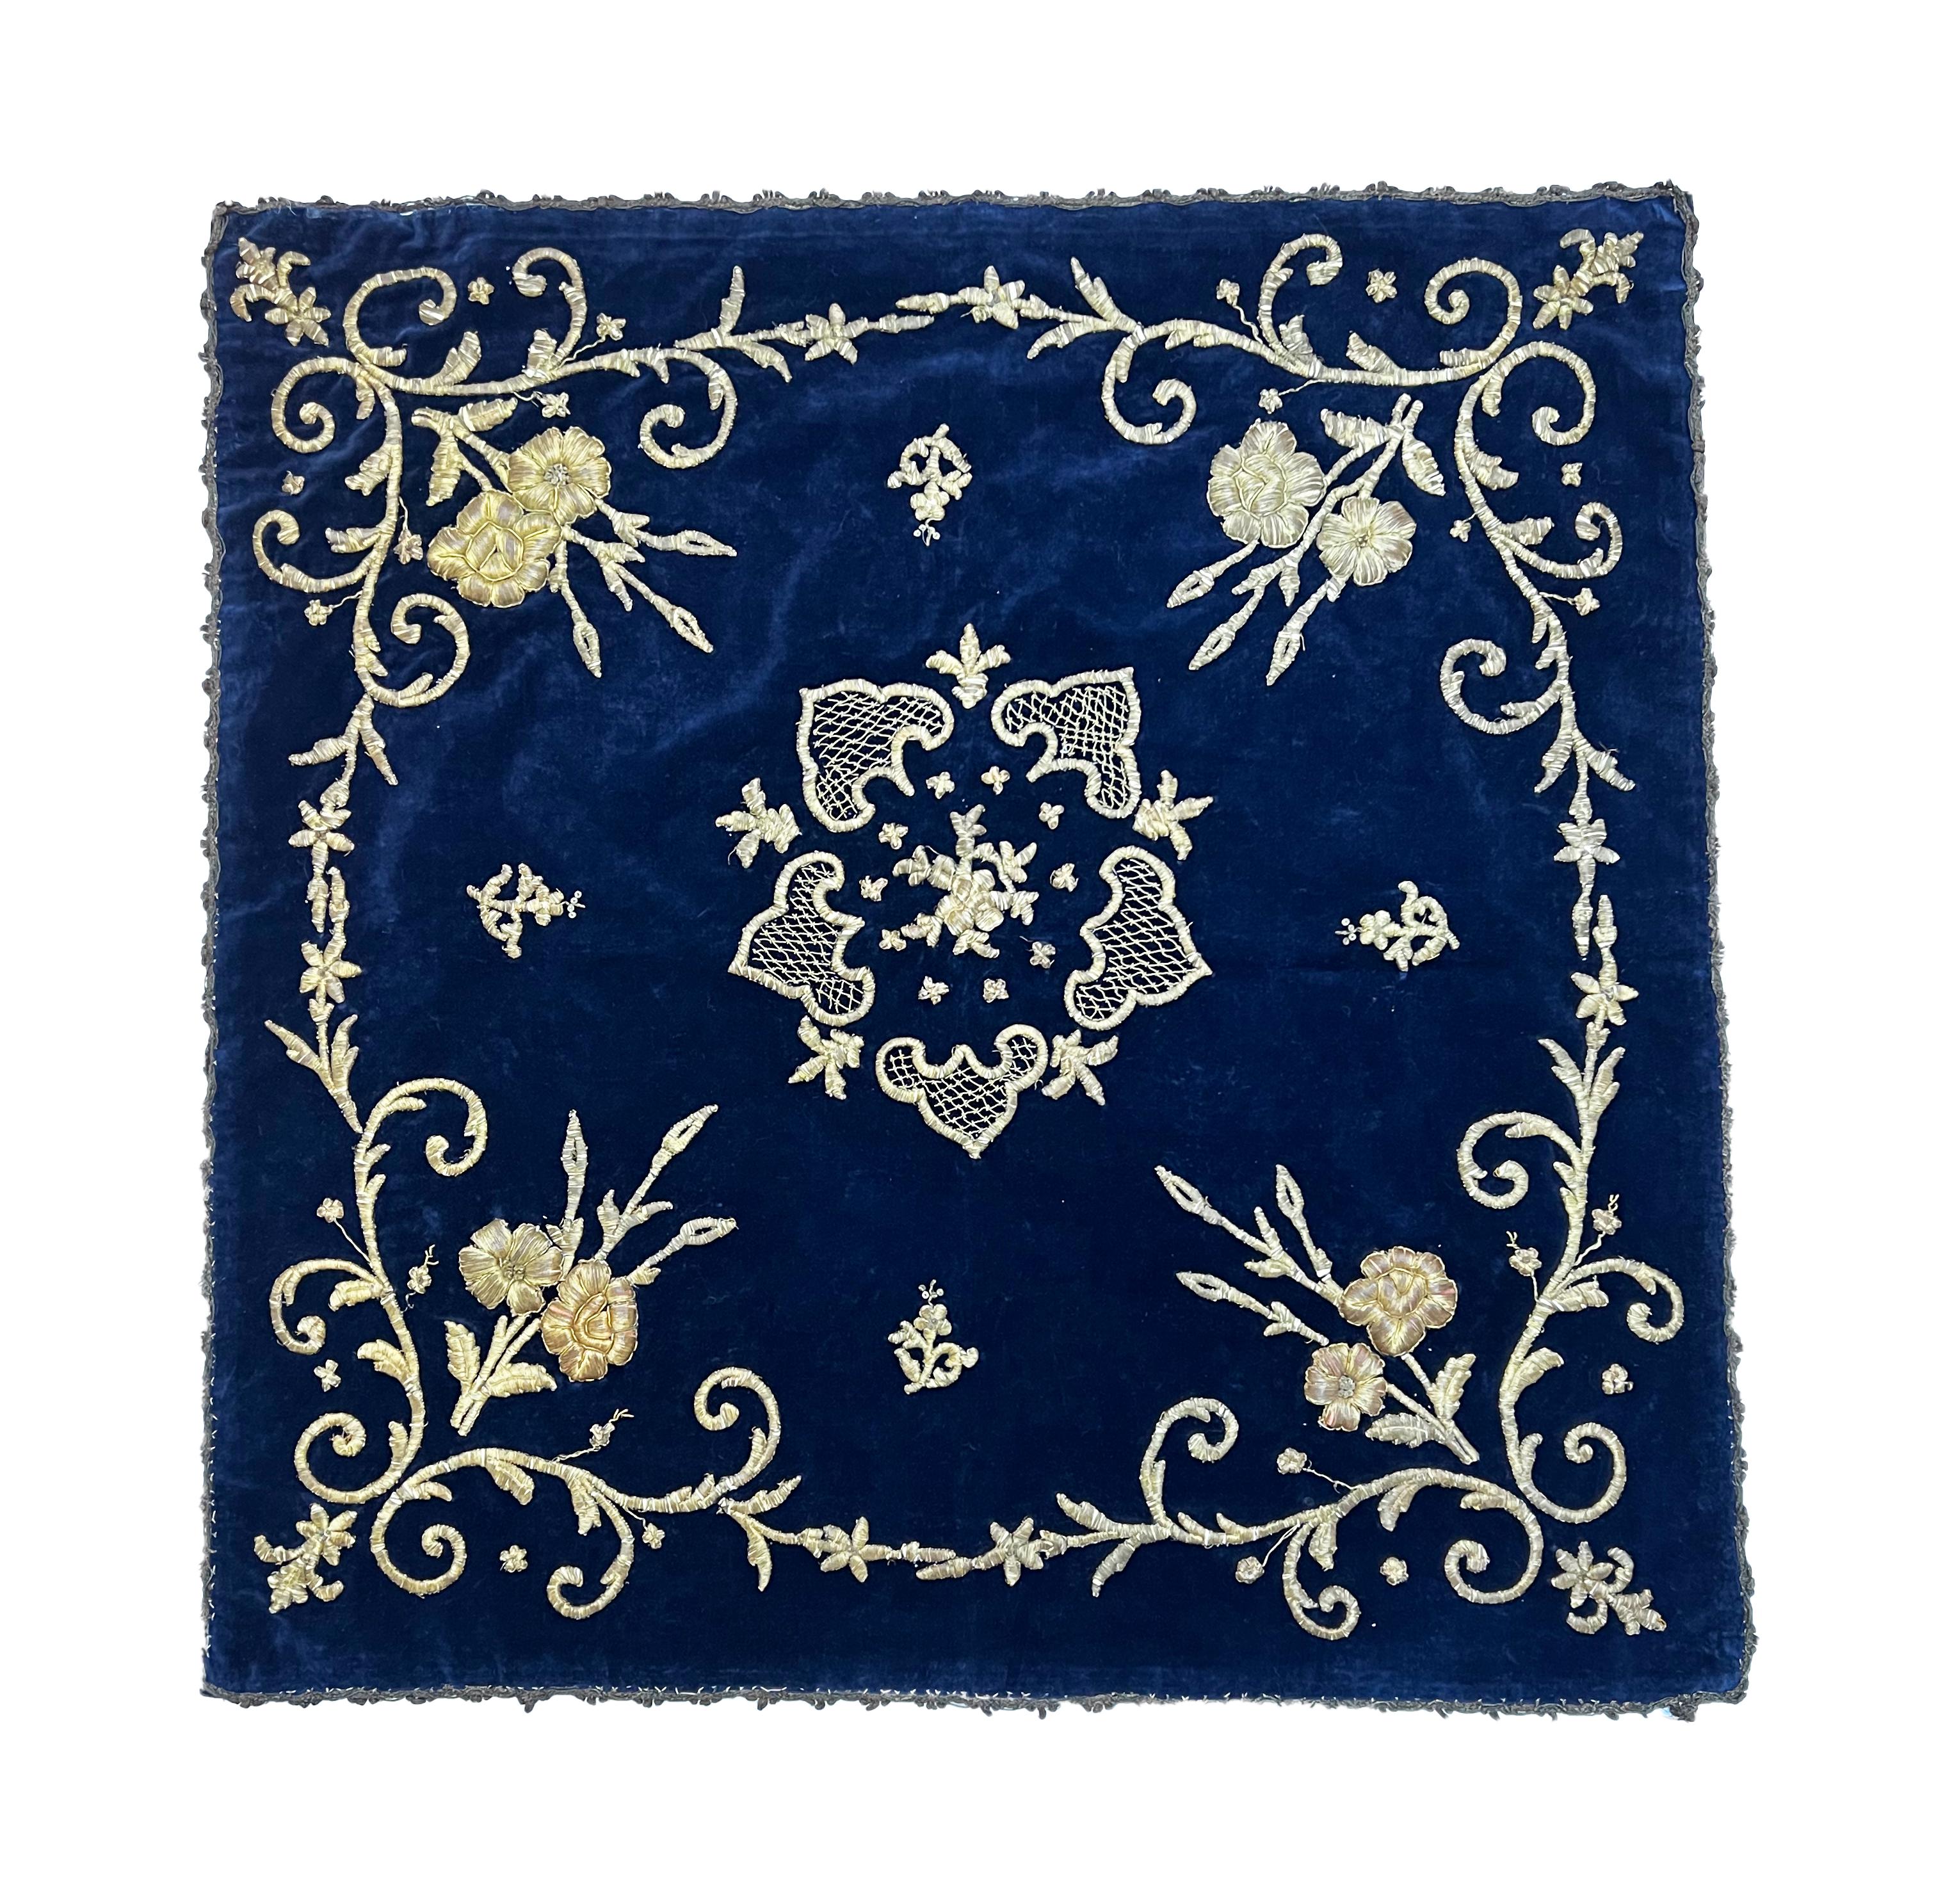 19th Century Collection of Ottoman Velvet and Metal-Thread Coverlet or Hanging, Turkey For Sale